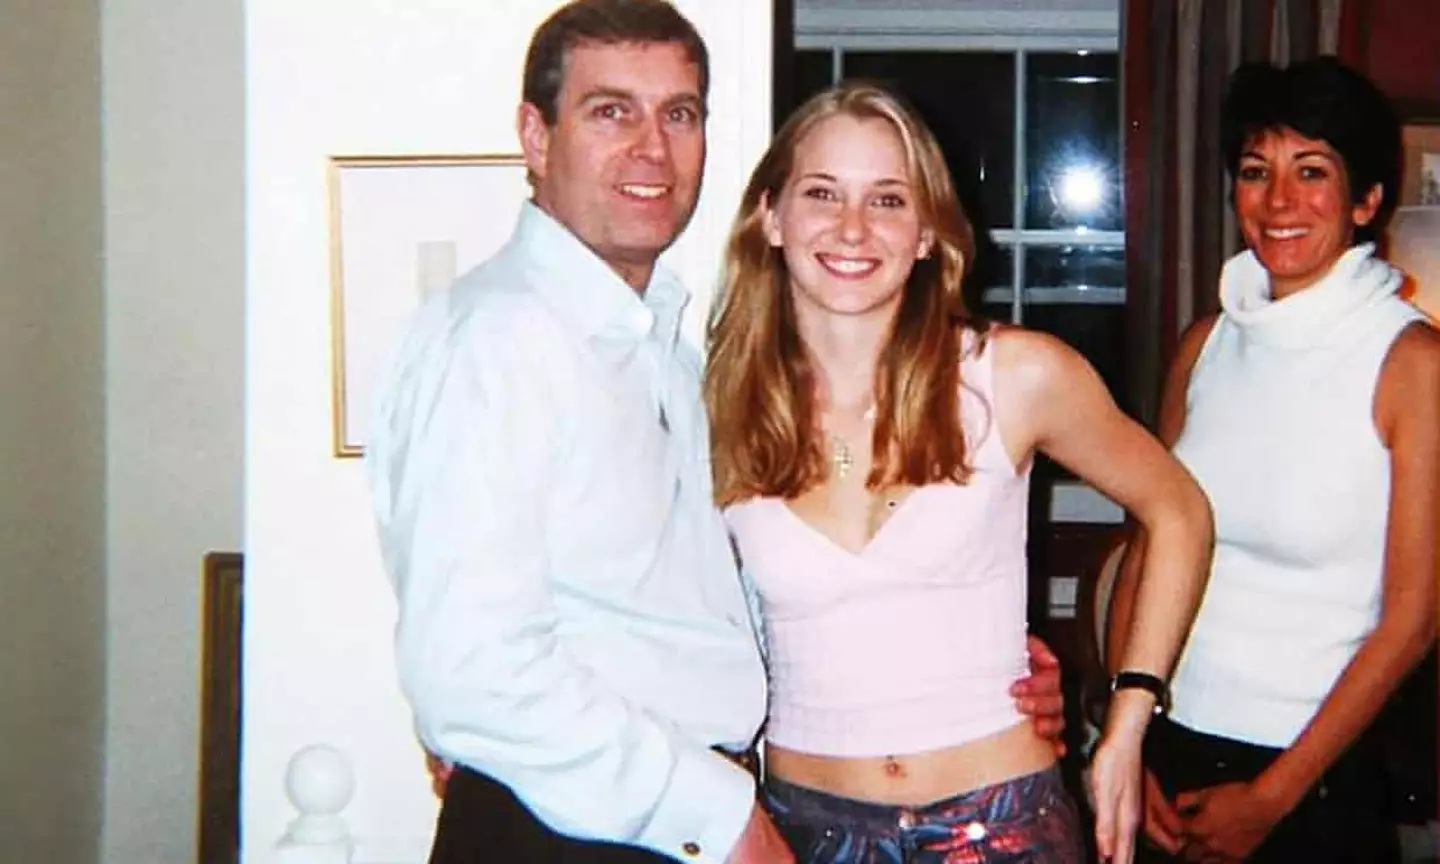 Prince Andrew allegedly assaulted Virginia when she was 17 (